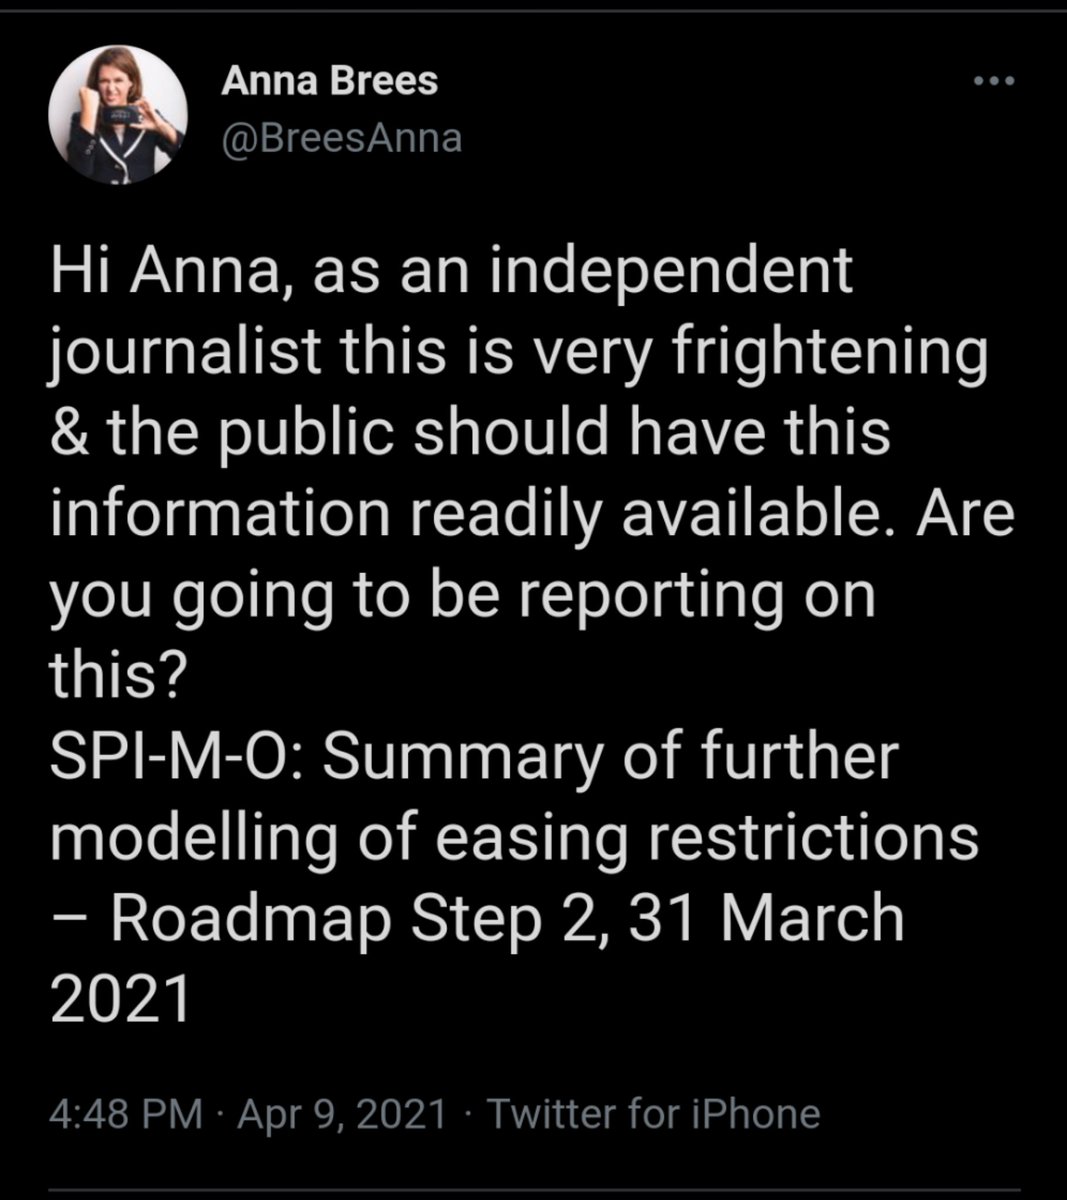 COVID-19 conspiracy theorist Anna Brees forgot to change accounts before praising herself tonight. After deleting the tweets, she's now trying to claim she's got no idea what people ate talking about.Amateur hour at Camp Covidian.